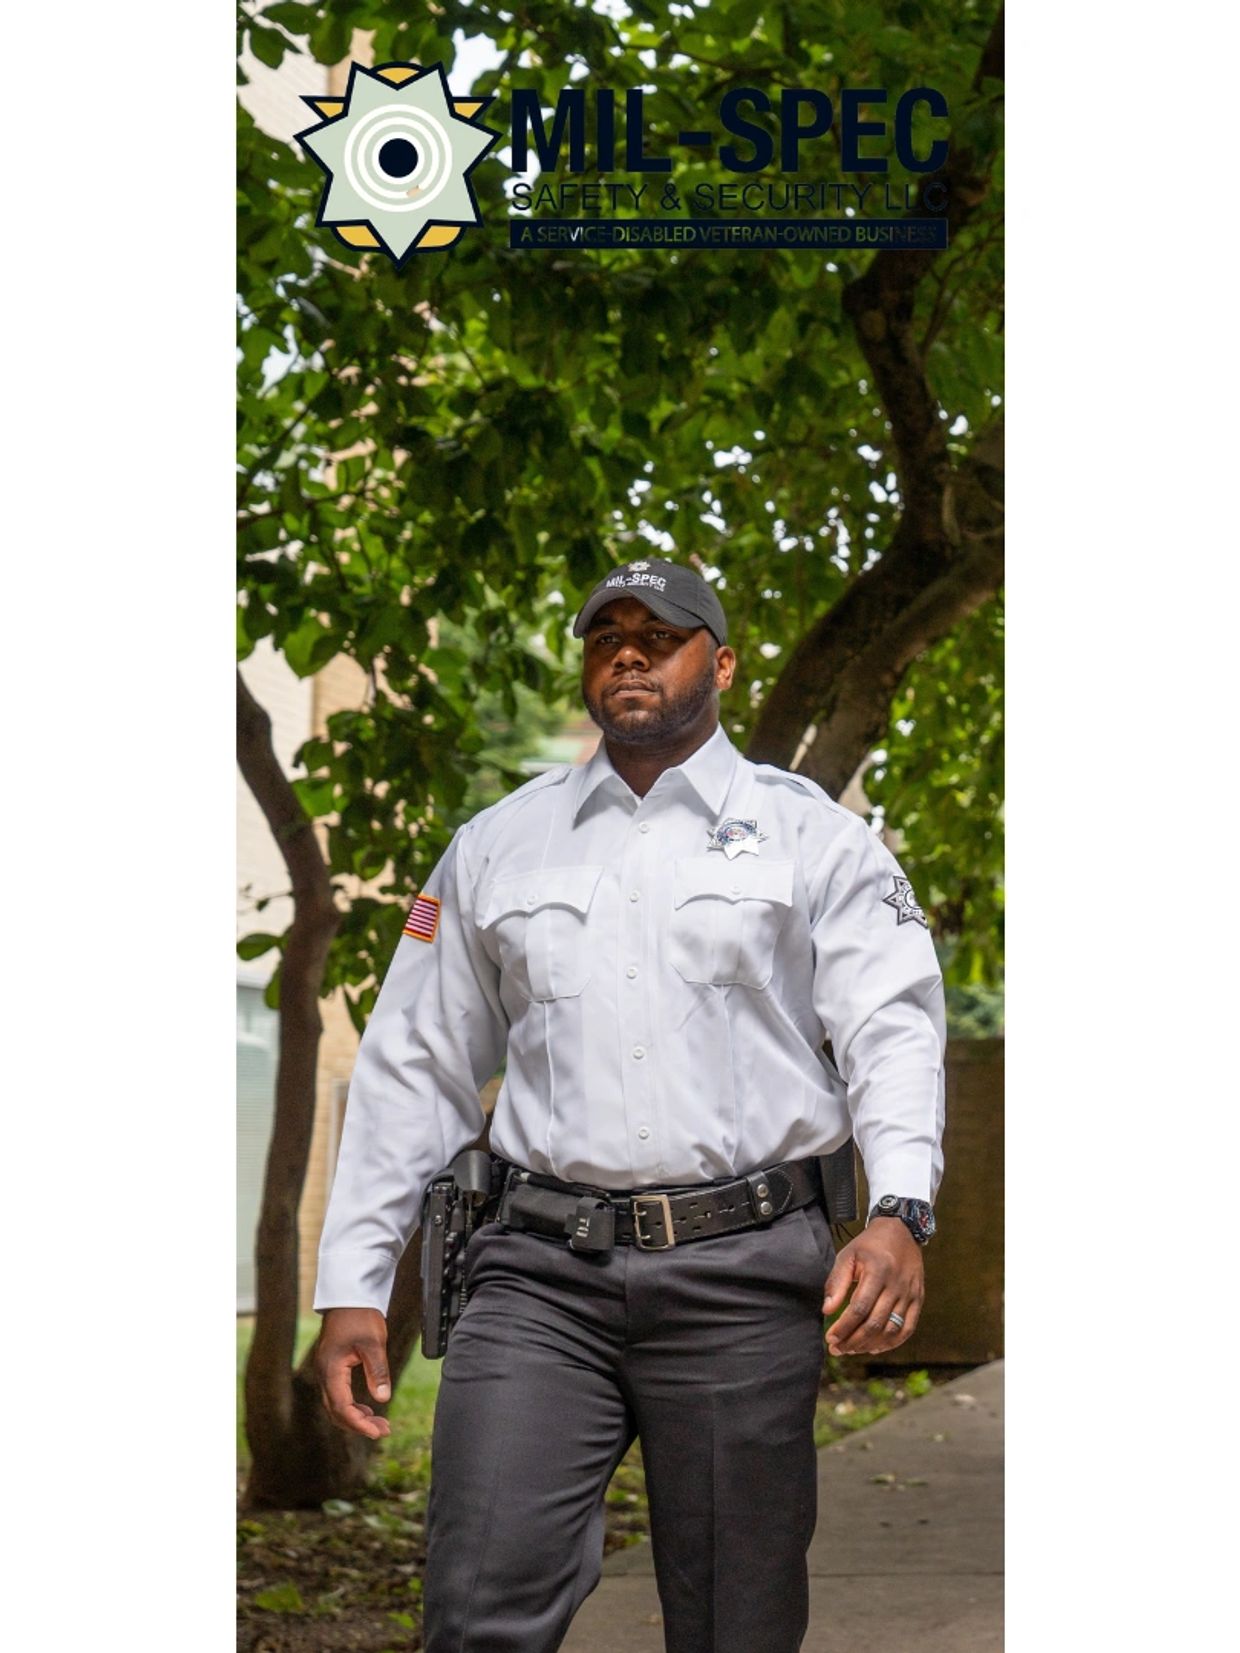 ARMED SECURITY SERVICES, armed guard, armed security officer 